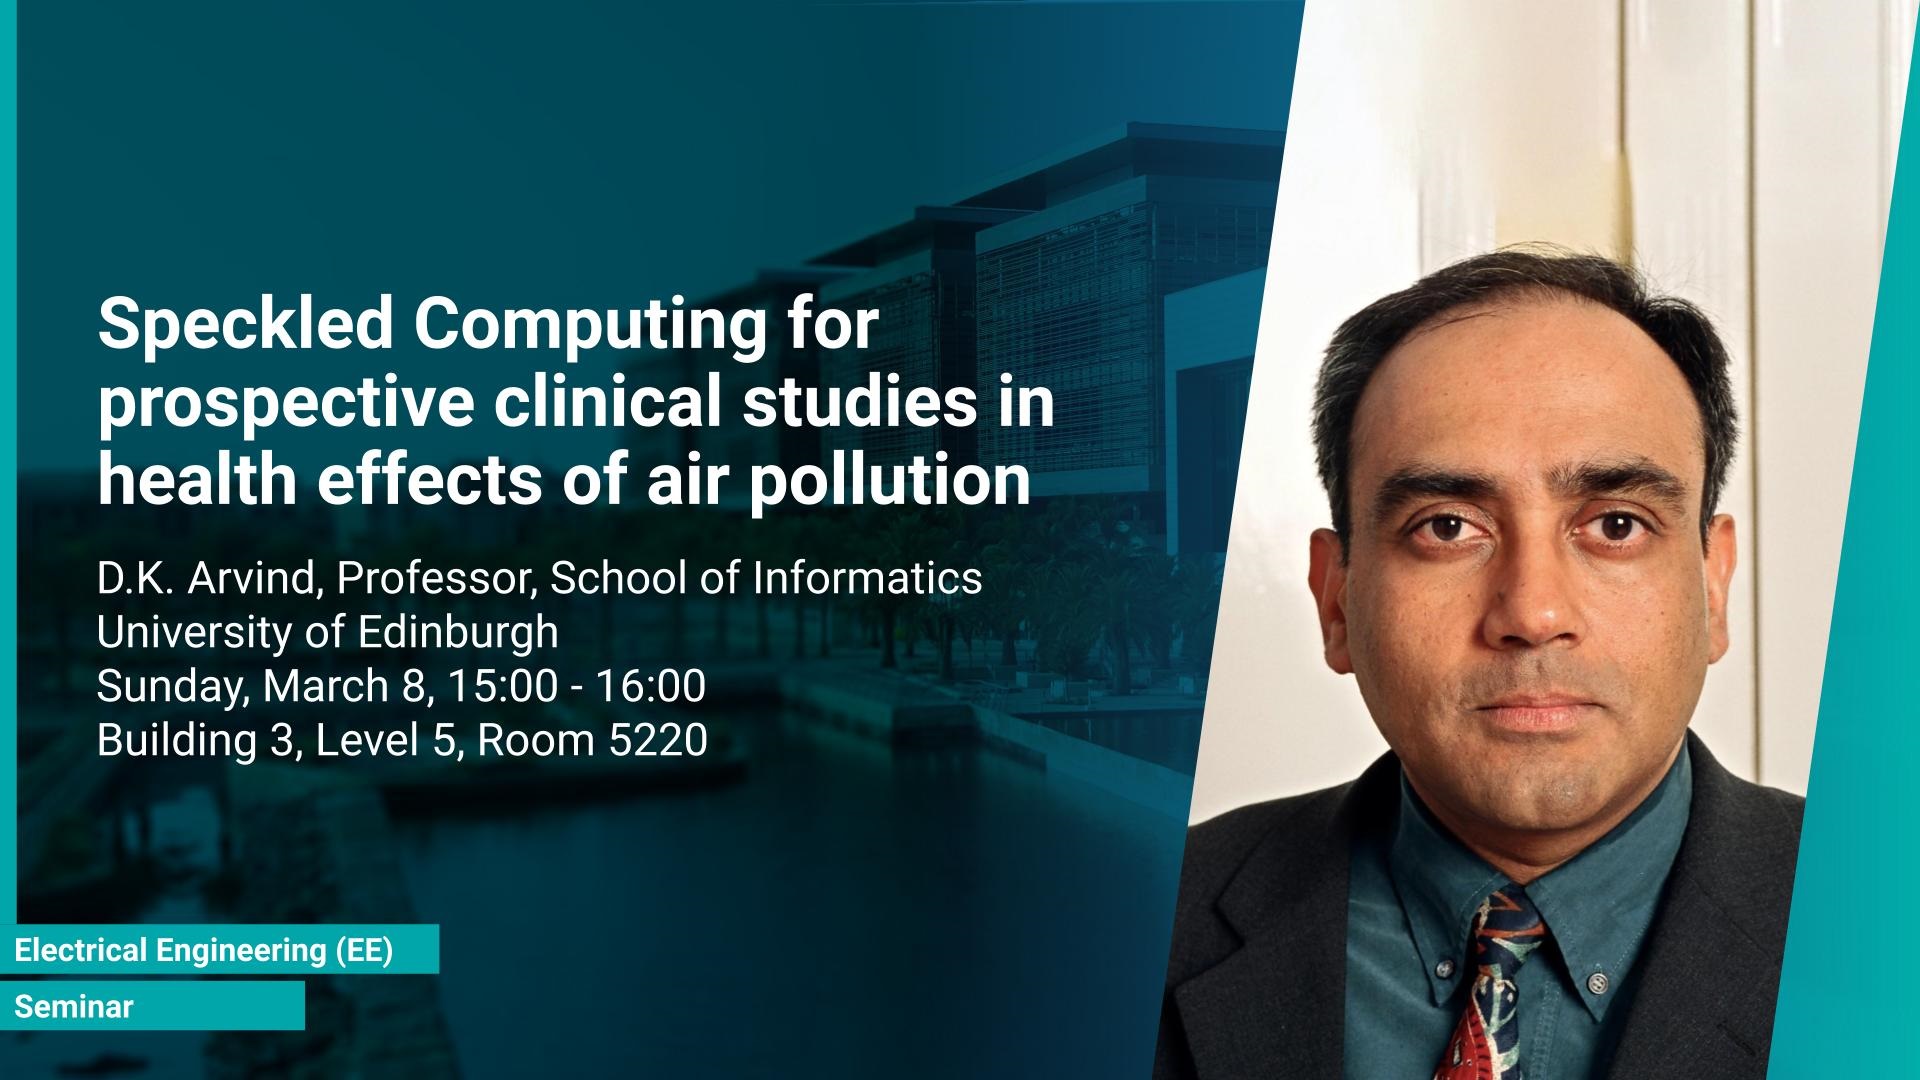 KAUST CEMSE EE Seminar Type D.K Arvind Speckled Computing for prospective clinical studies in health effects of air pollution.jpg